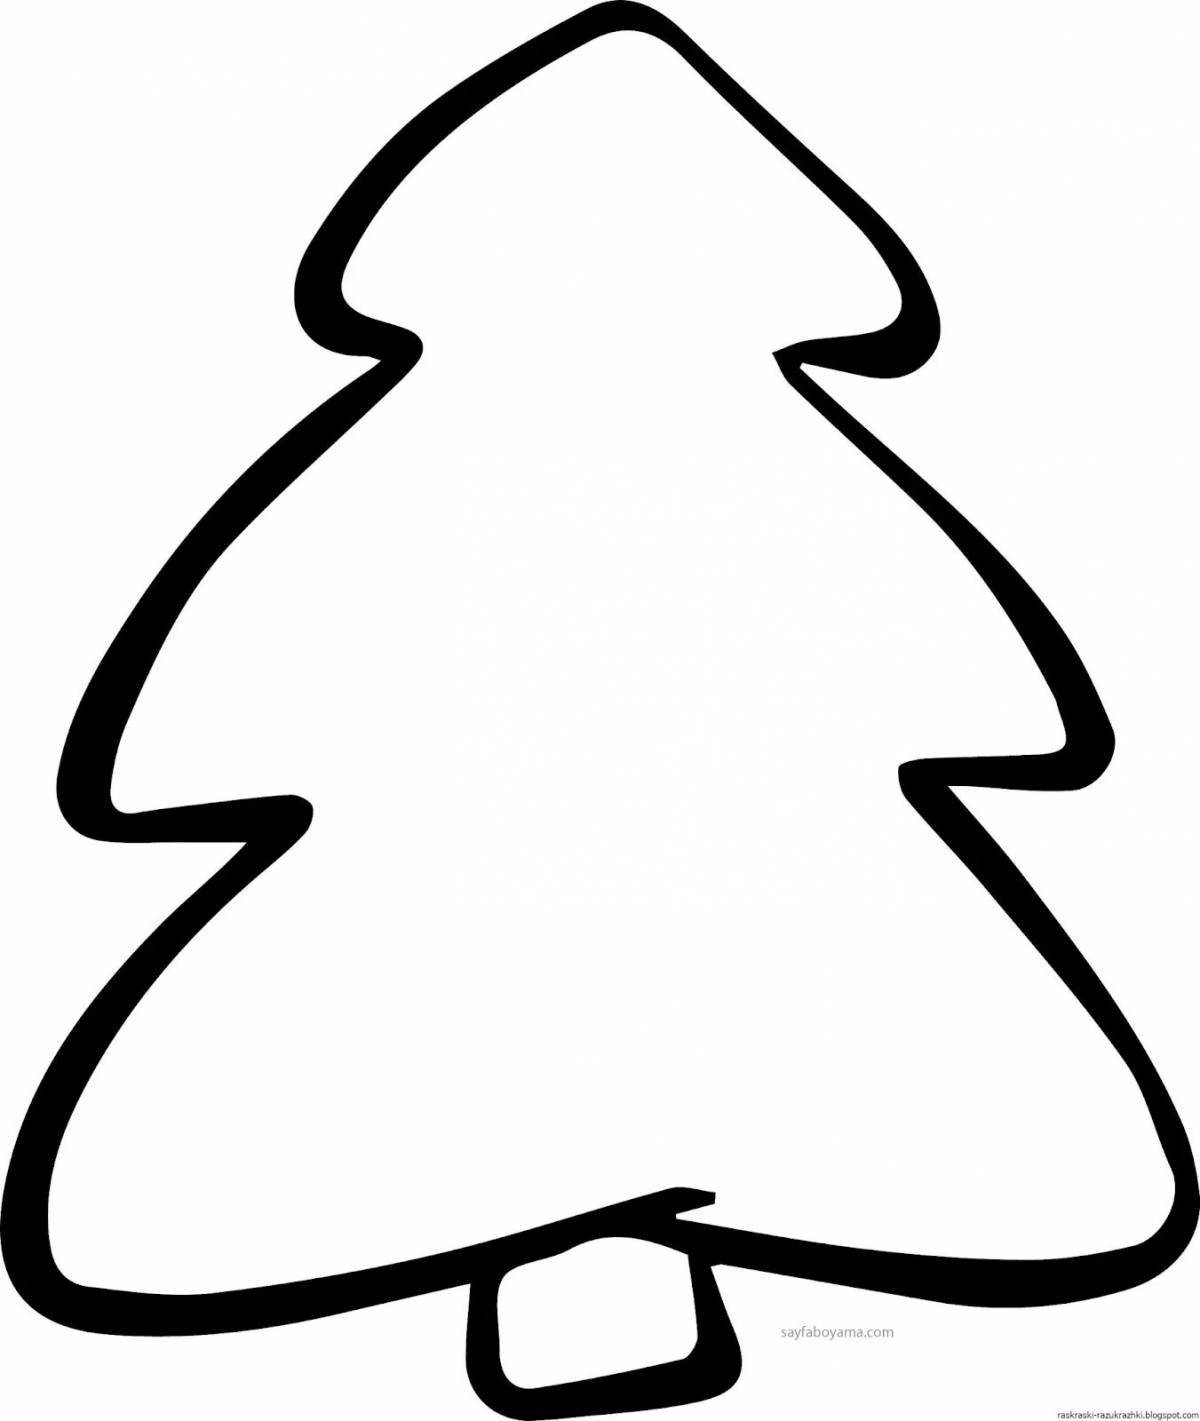 Shiny Christmas tree coloring book for kids